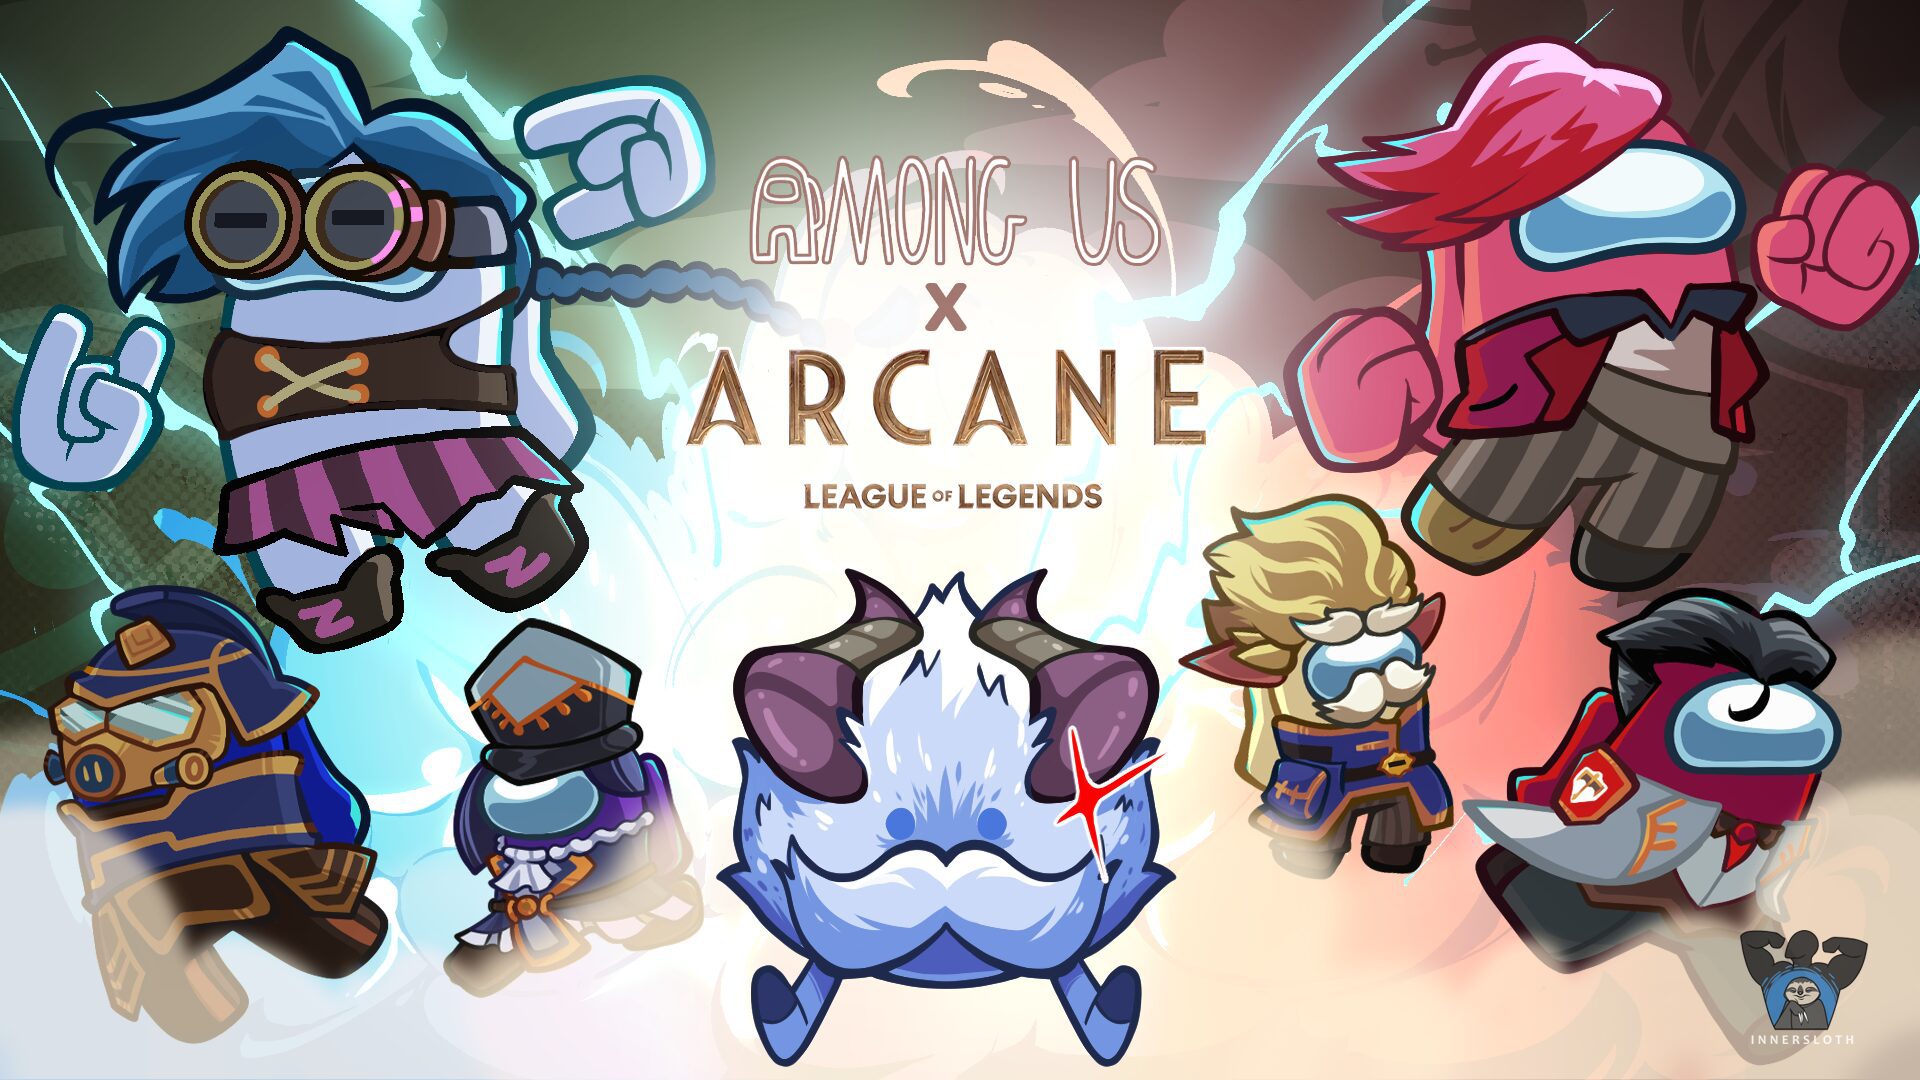 Among Us x Arcane brings new League of Legends Cosmicube